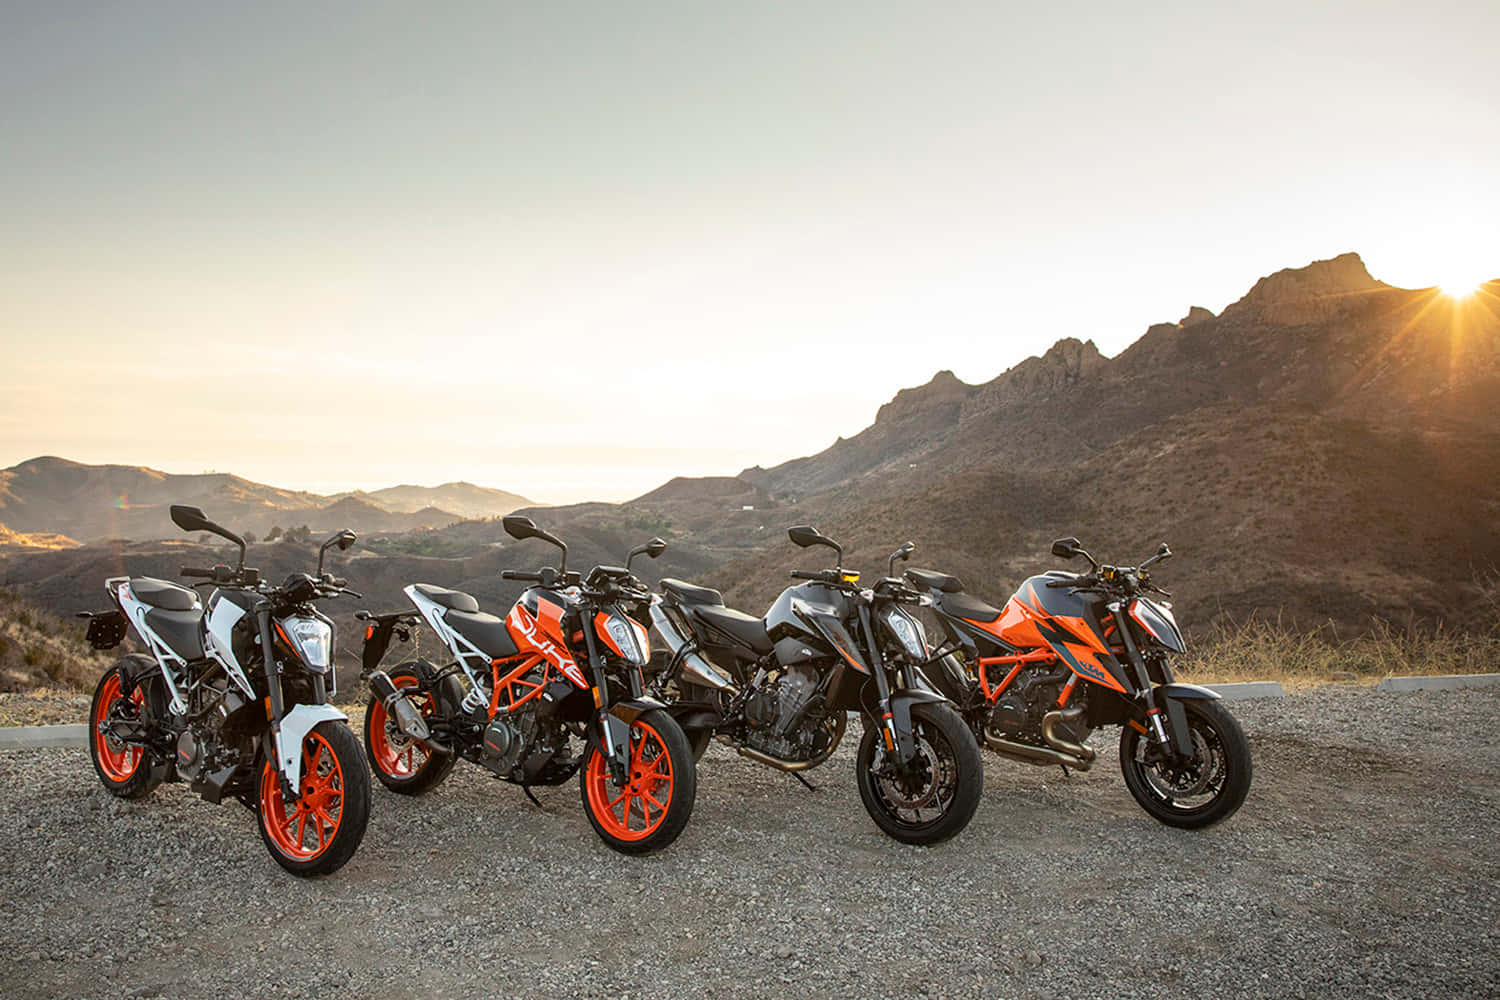 KTM Duke - the perfect bike for a thrilling ride!